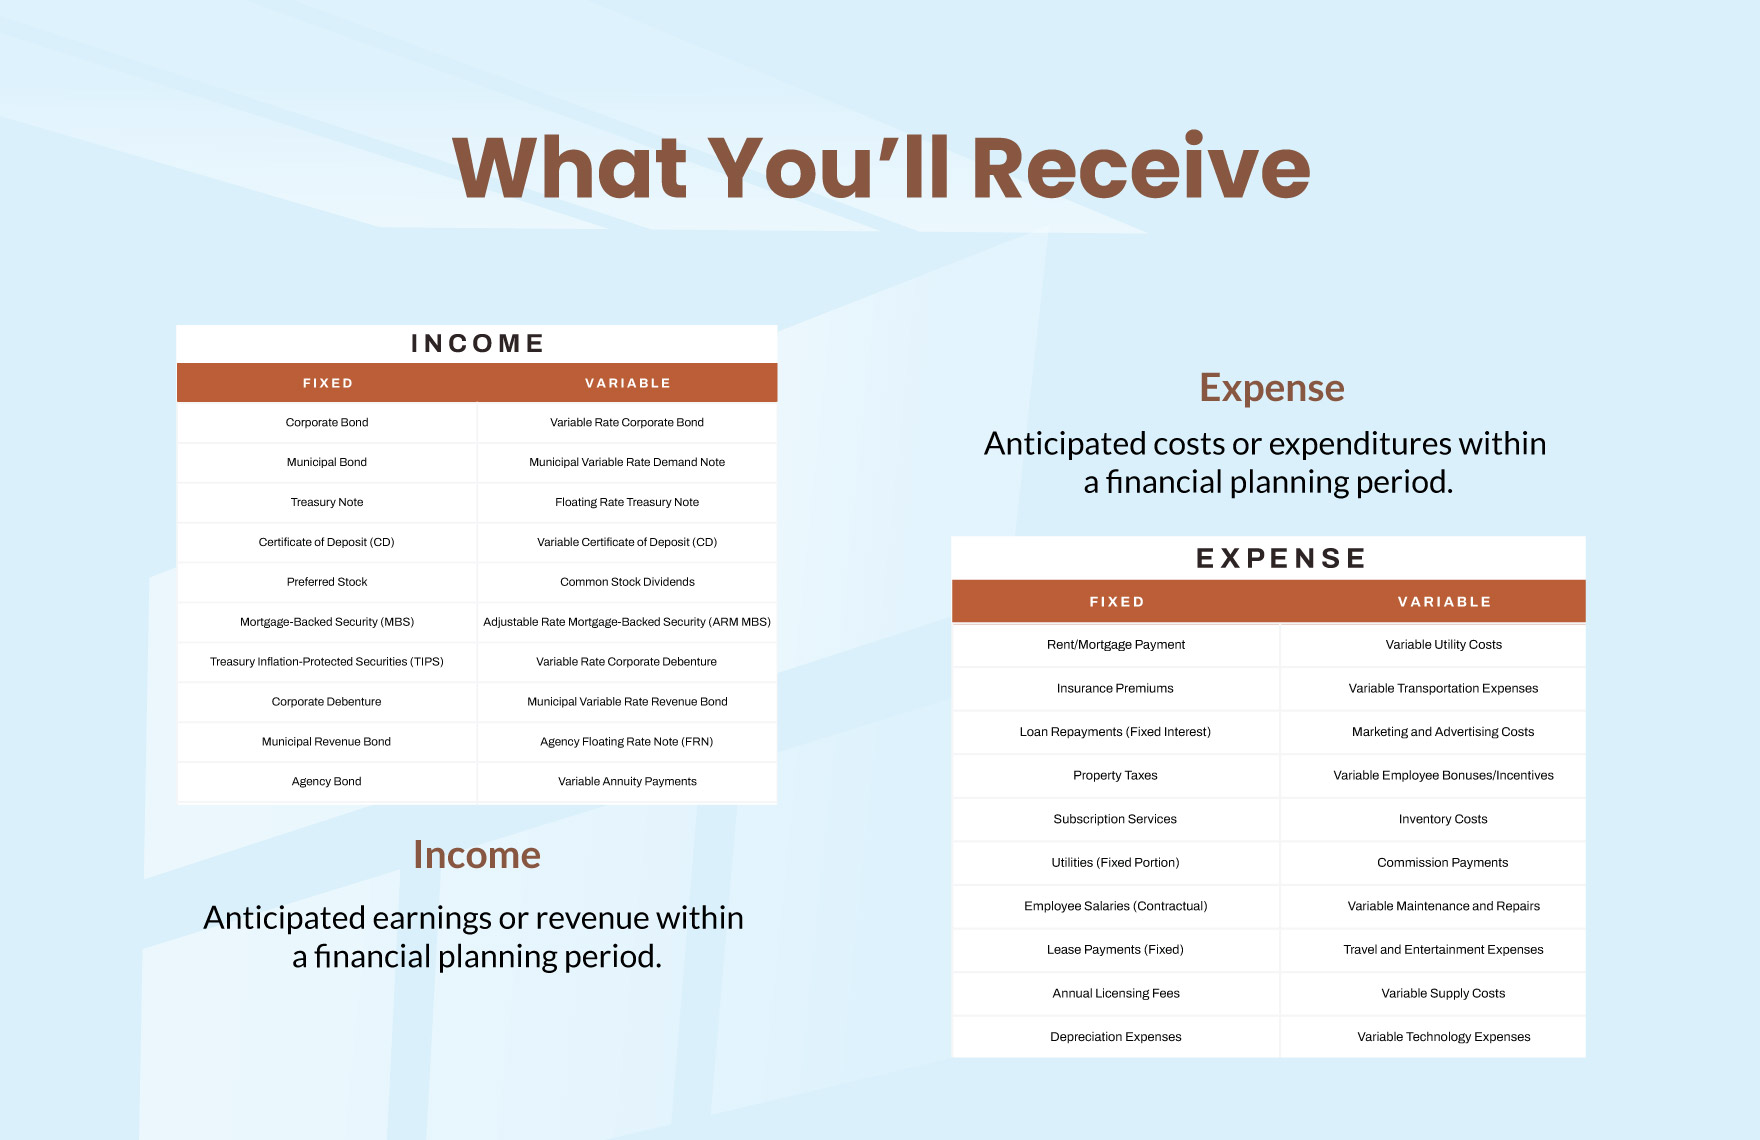 Forecast Income and Expense Template